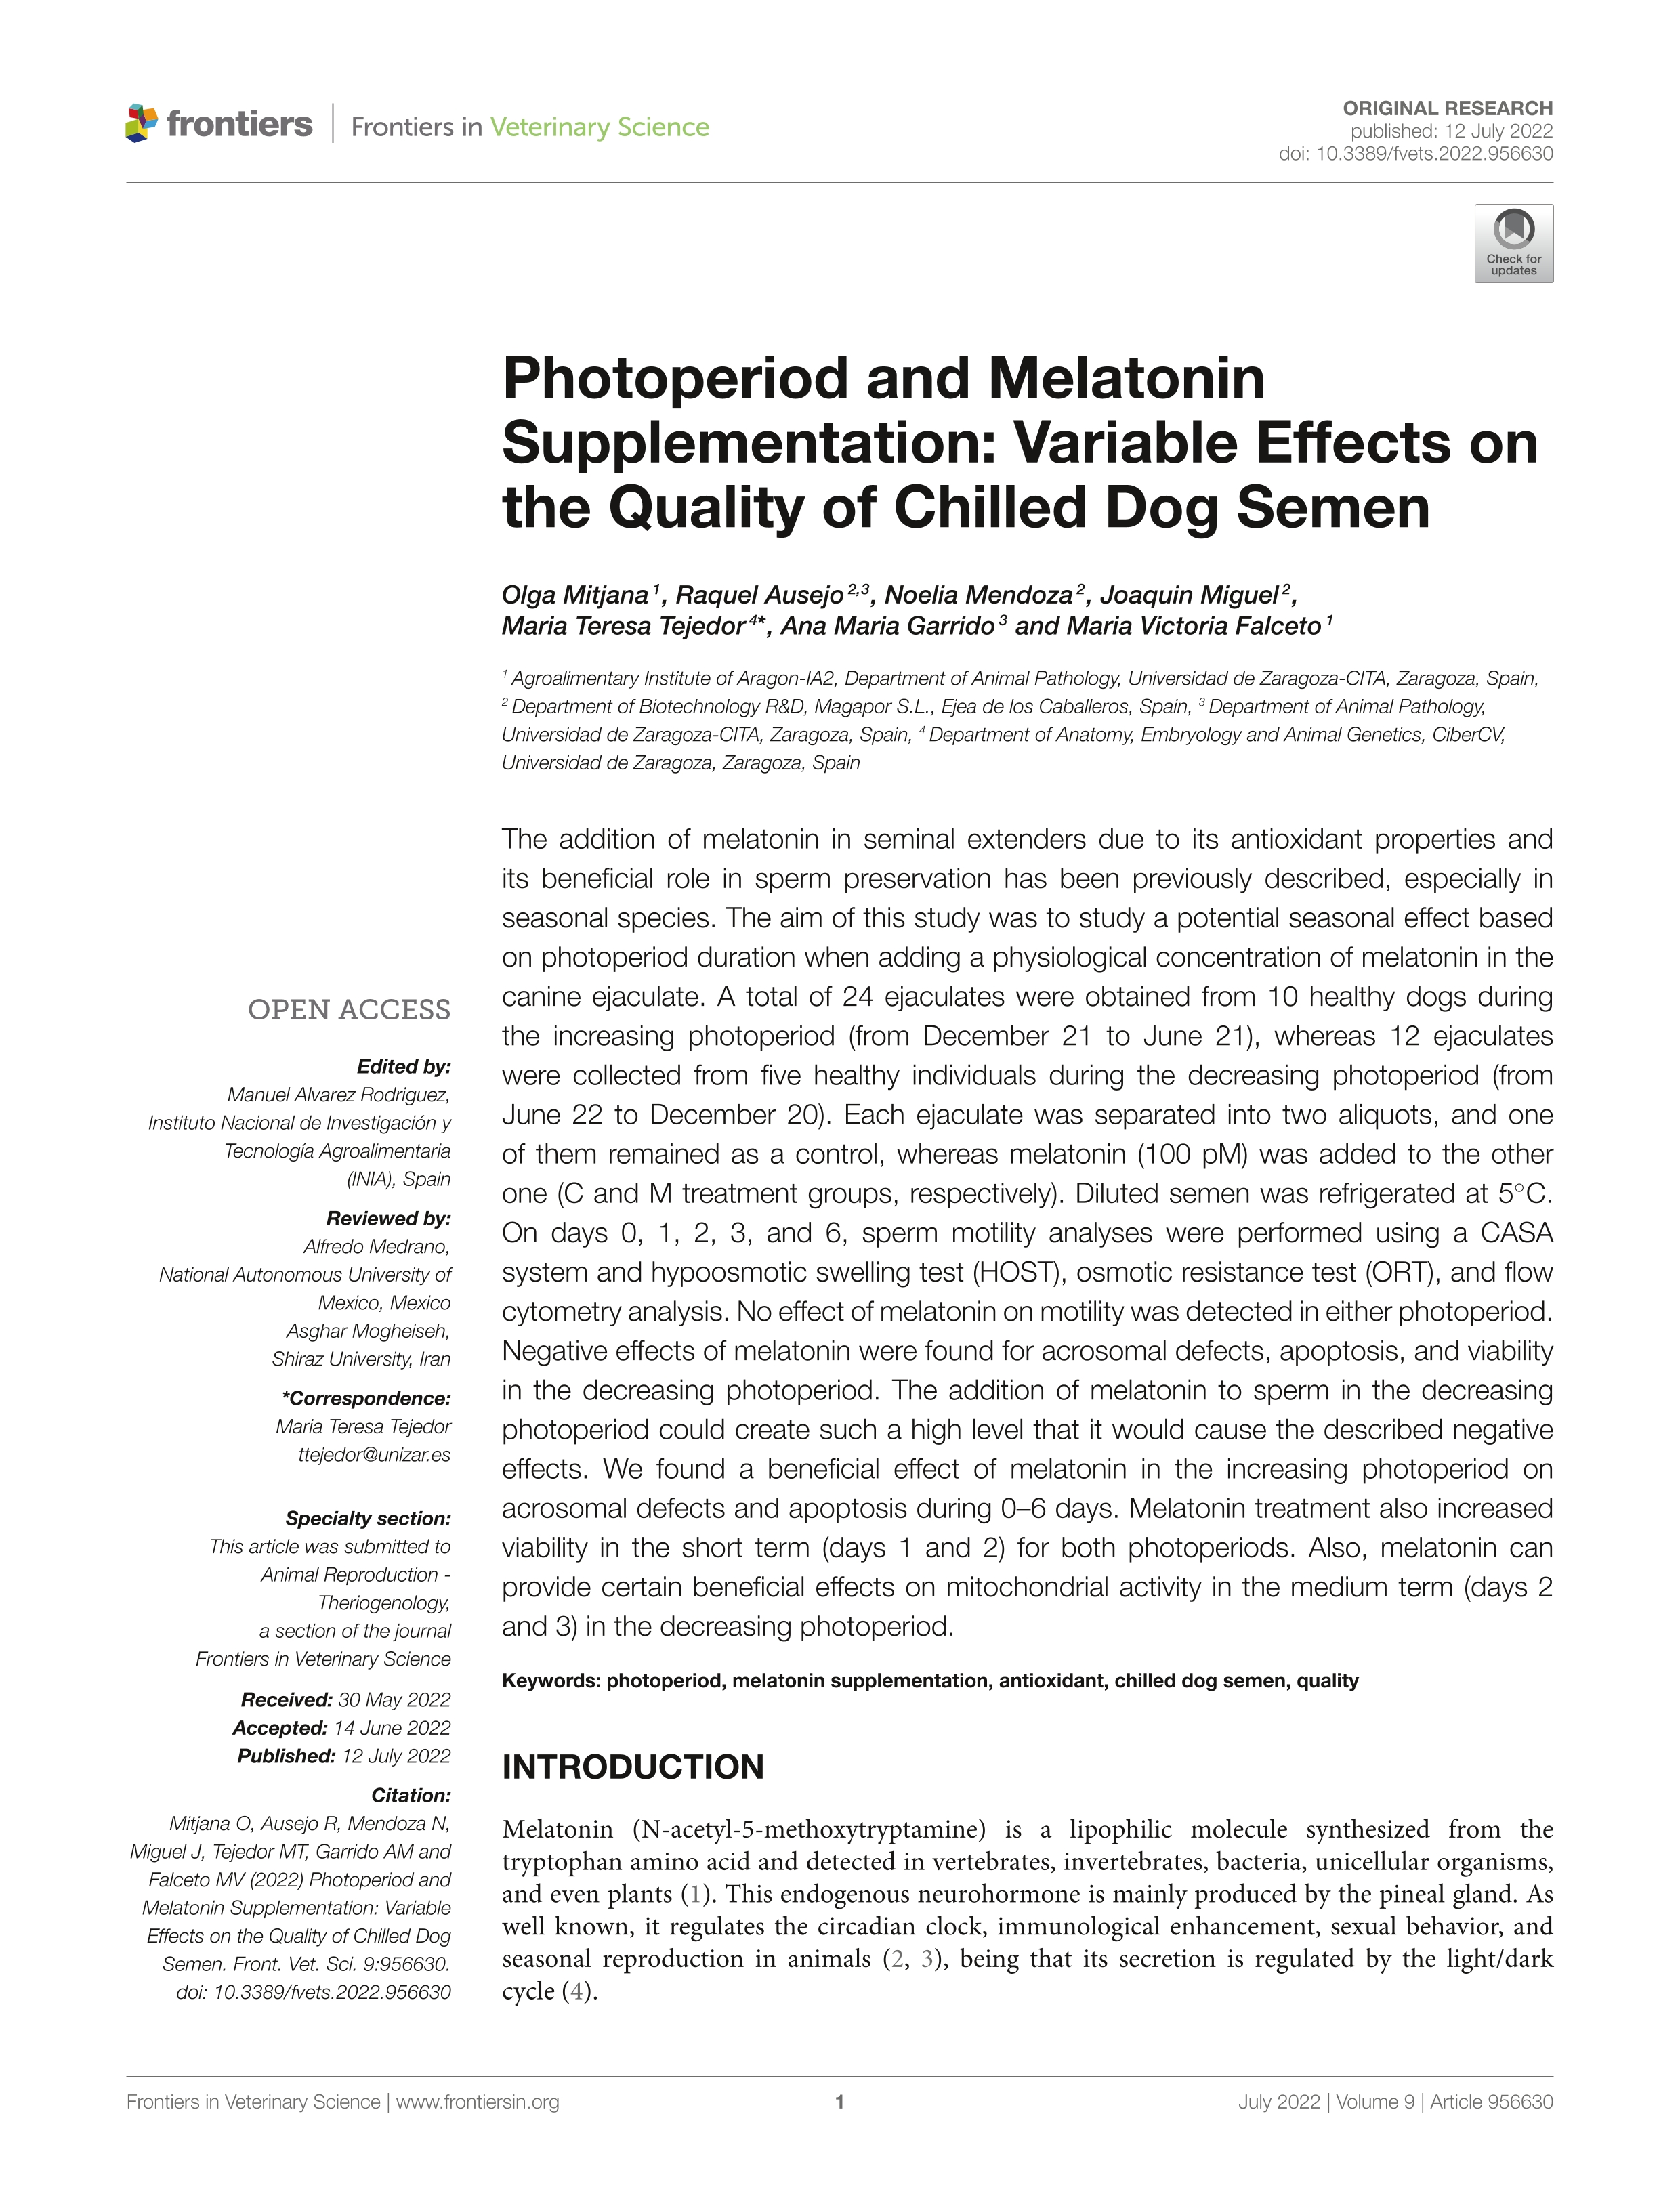 Photoperiod and Melatonin Supplementation: Variable Effects on the Quality of Chilled Dog Semen